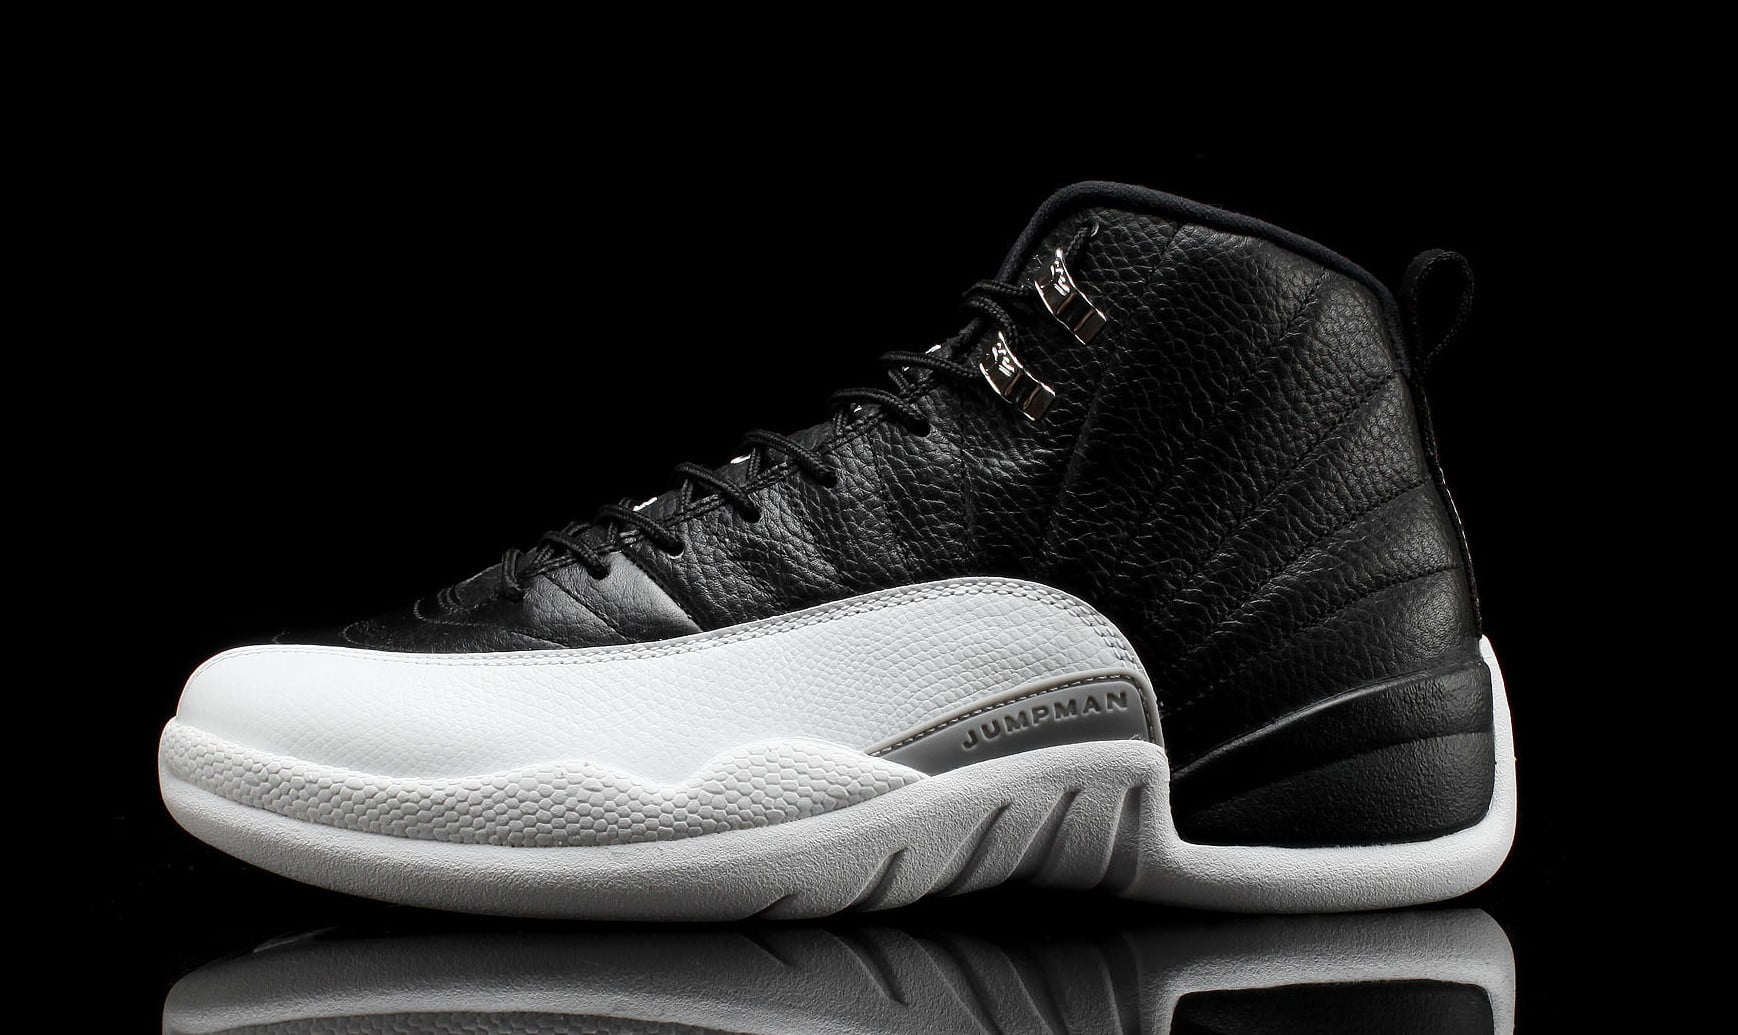 Unpaired Black And White Nike Air Jordan 12 Shoe, Shoes, - Sneakers , HD Wallpaper & Backgrounds